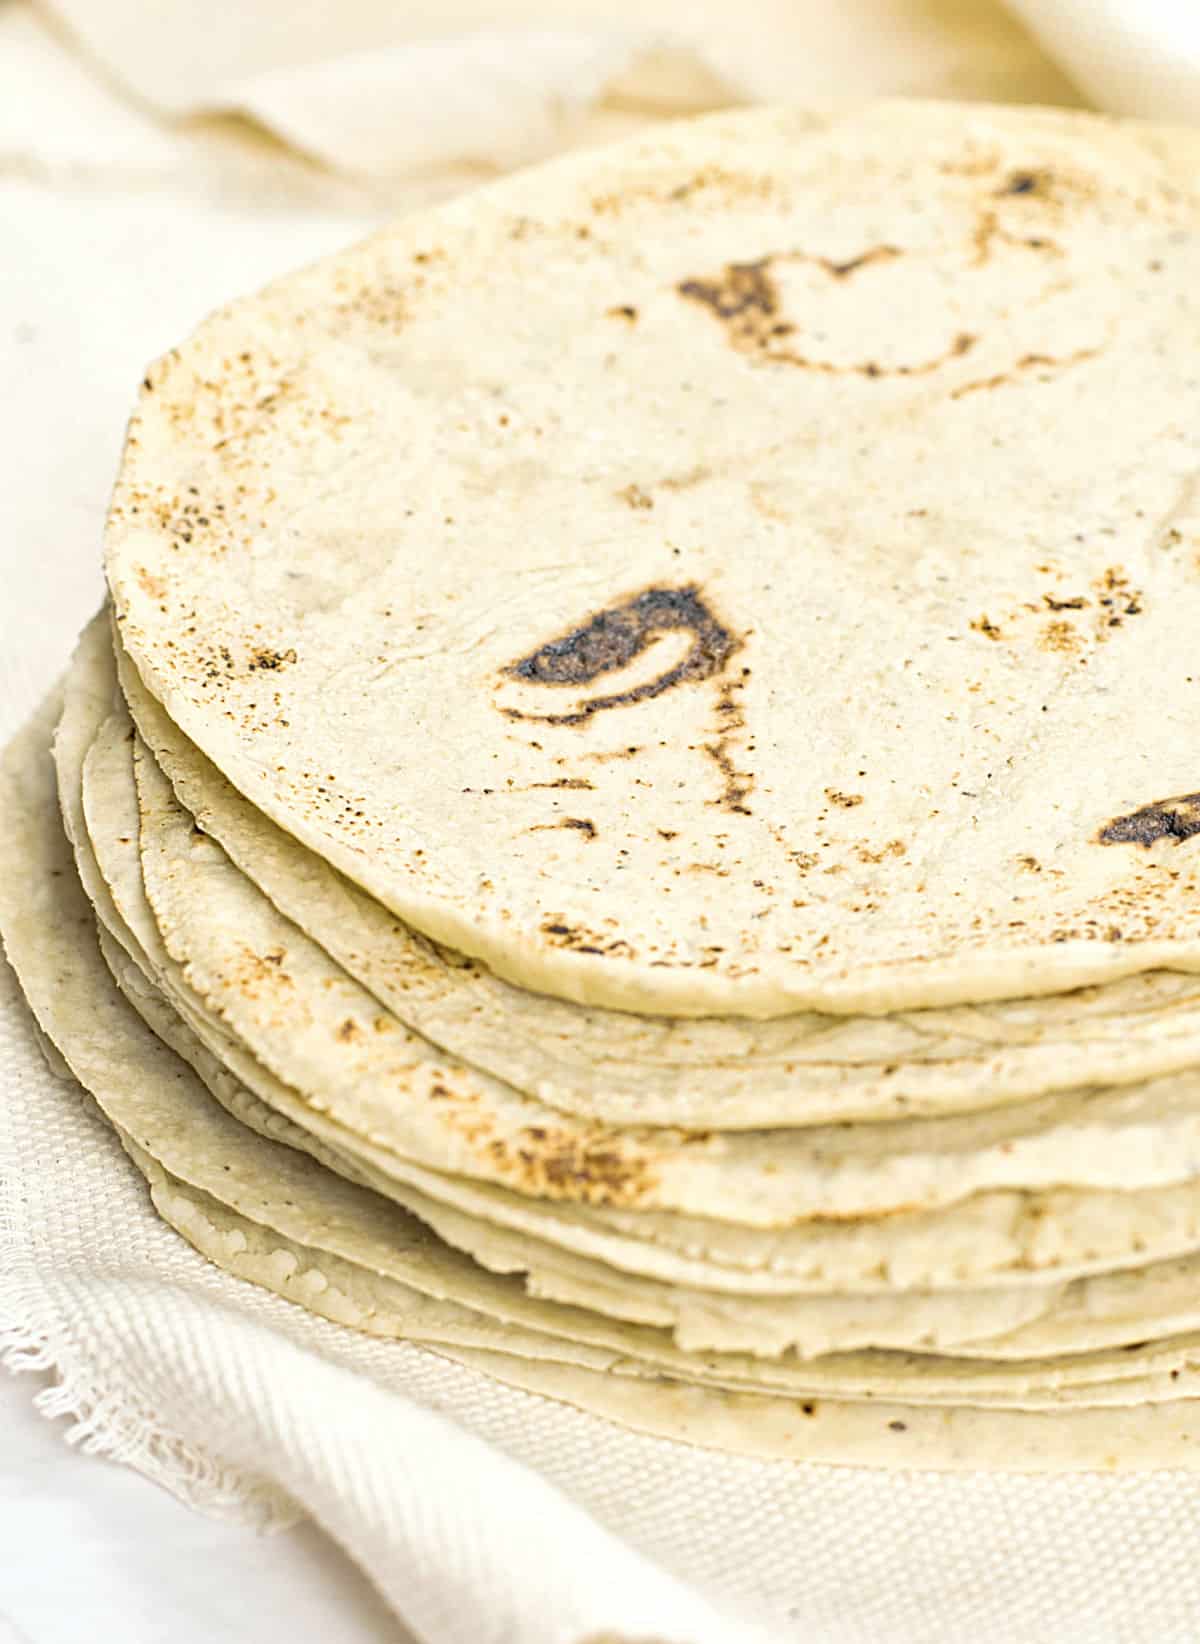 Stacked homemade corn tortilla on a cream colored cloth. 